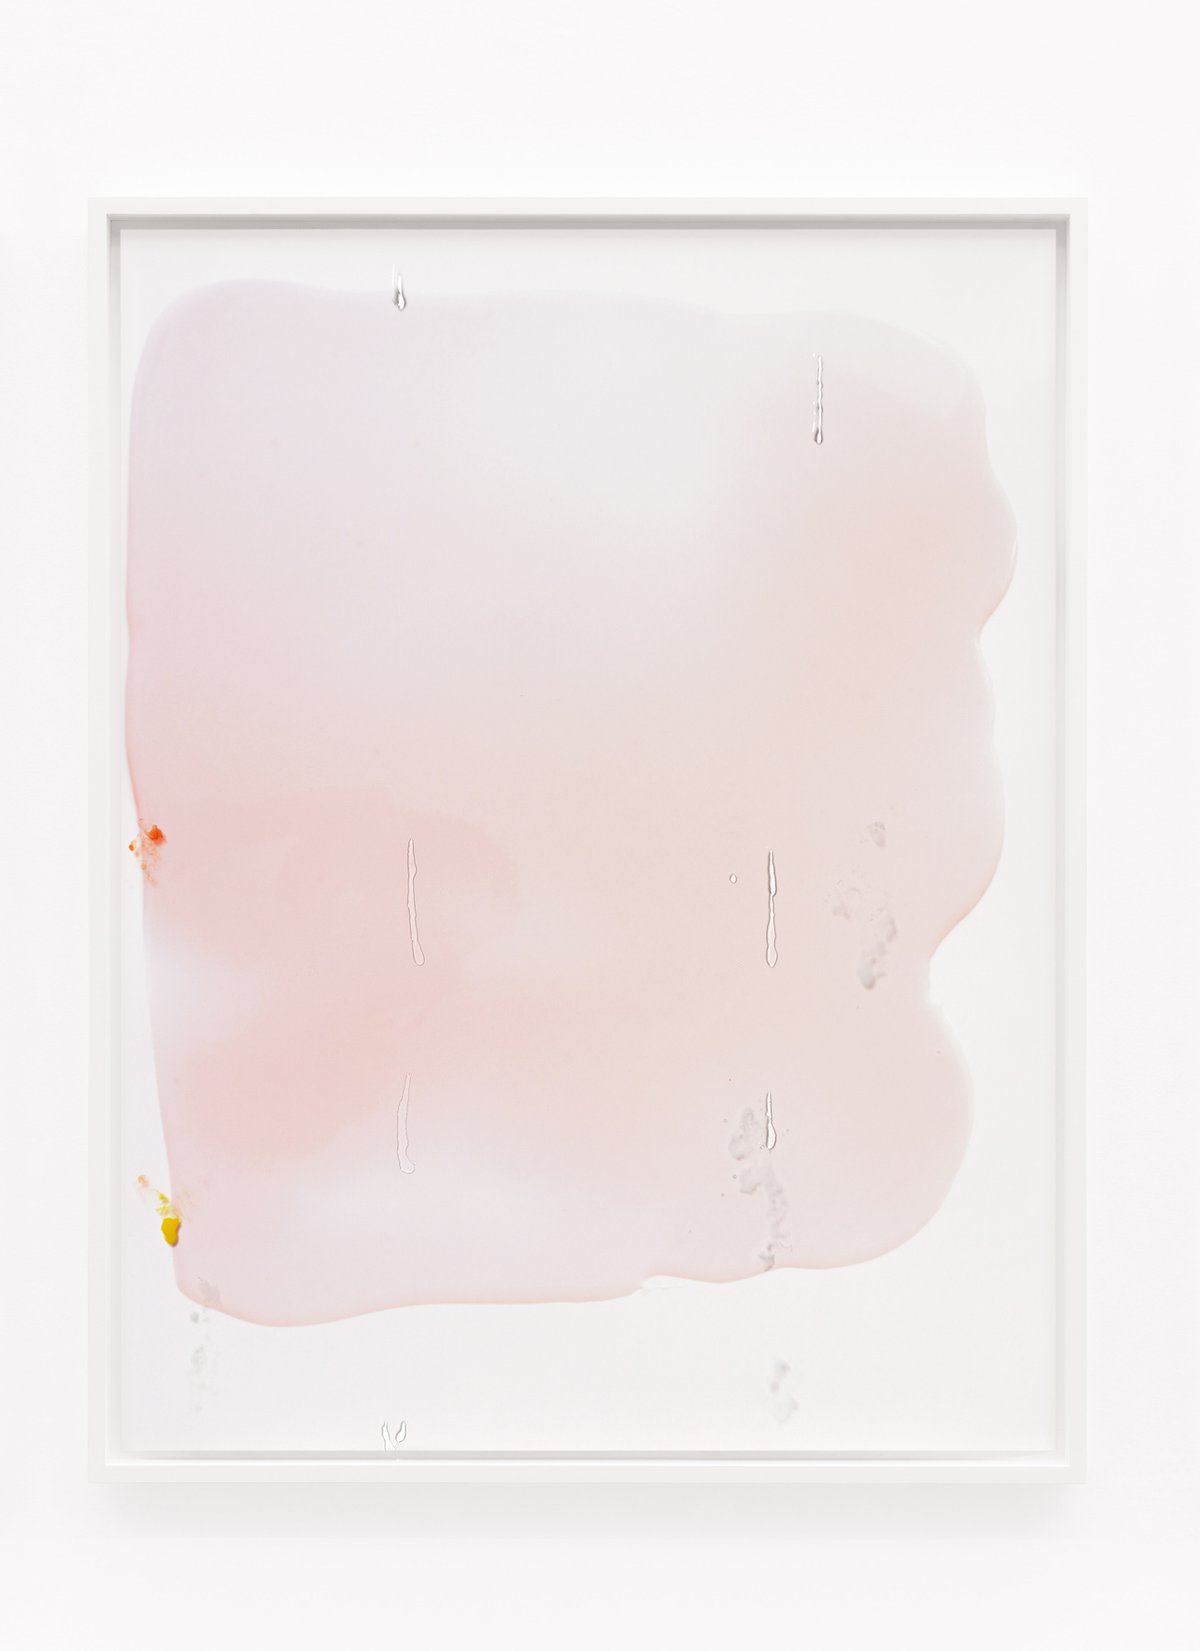 Lisa HolzerThe Party Sequel (Berlin), 2017Pigment print on cotton paper, crystal clear 202/1 polyurethane and acrylic paint on glass110.3 x 86.3 cm